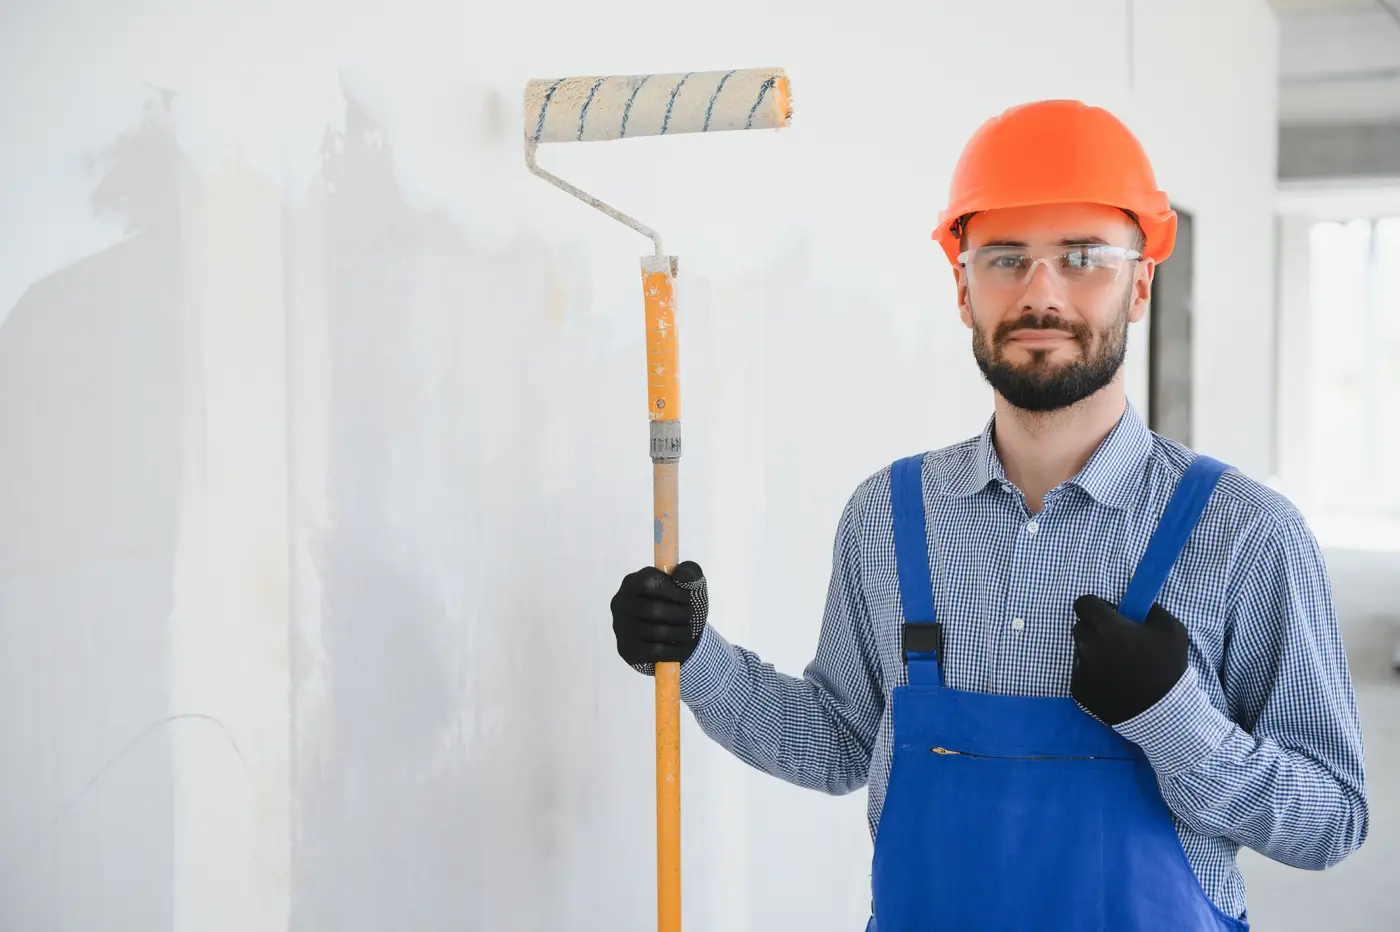 Professional painter with blue coveralls and hard hat, holding paint roller